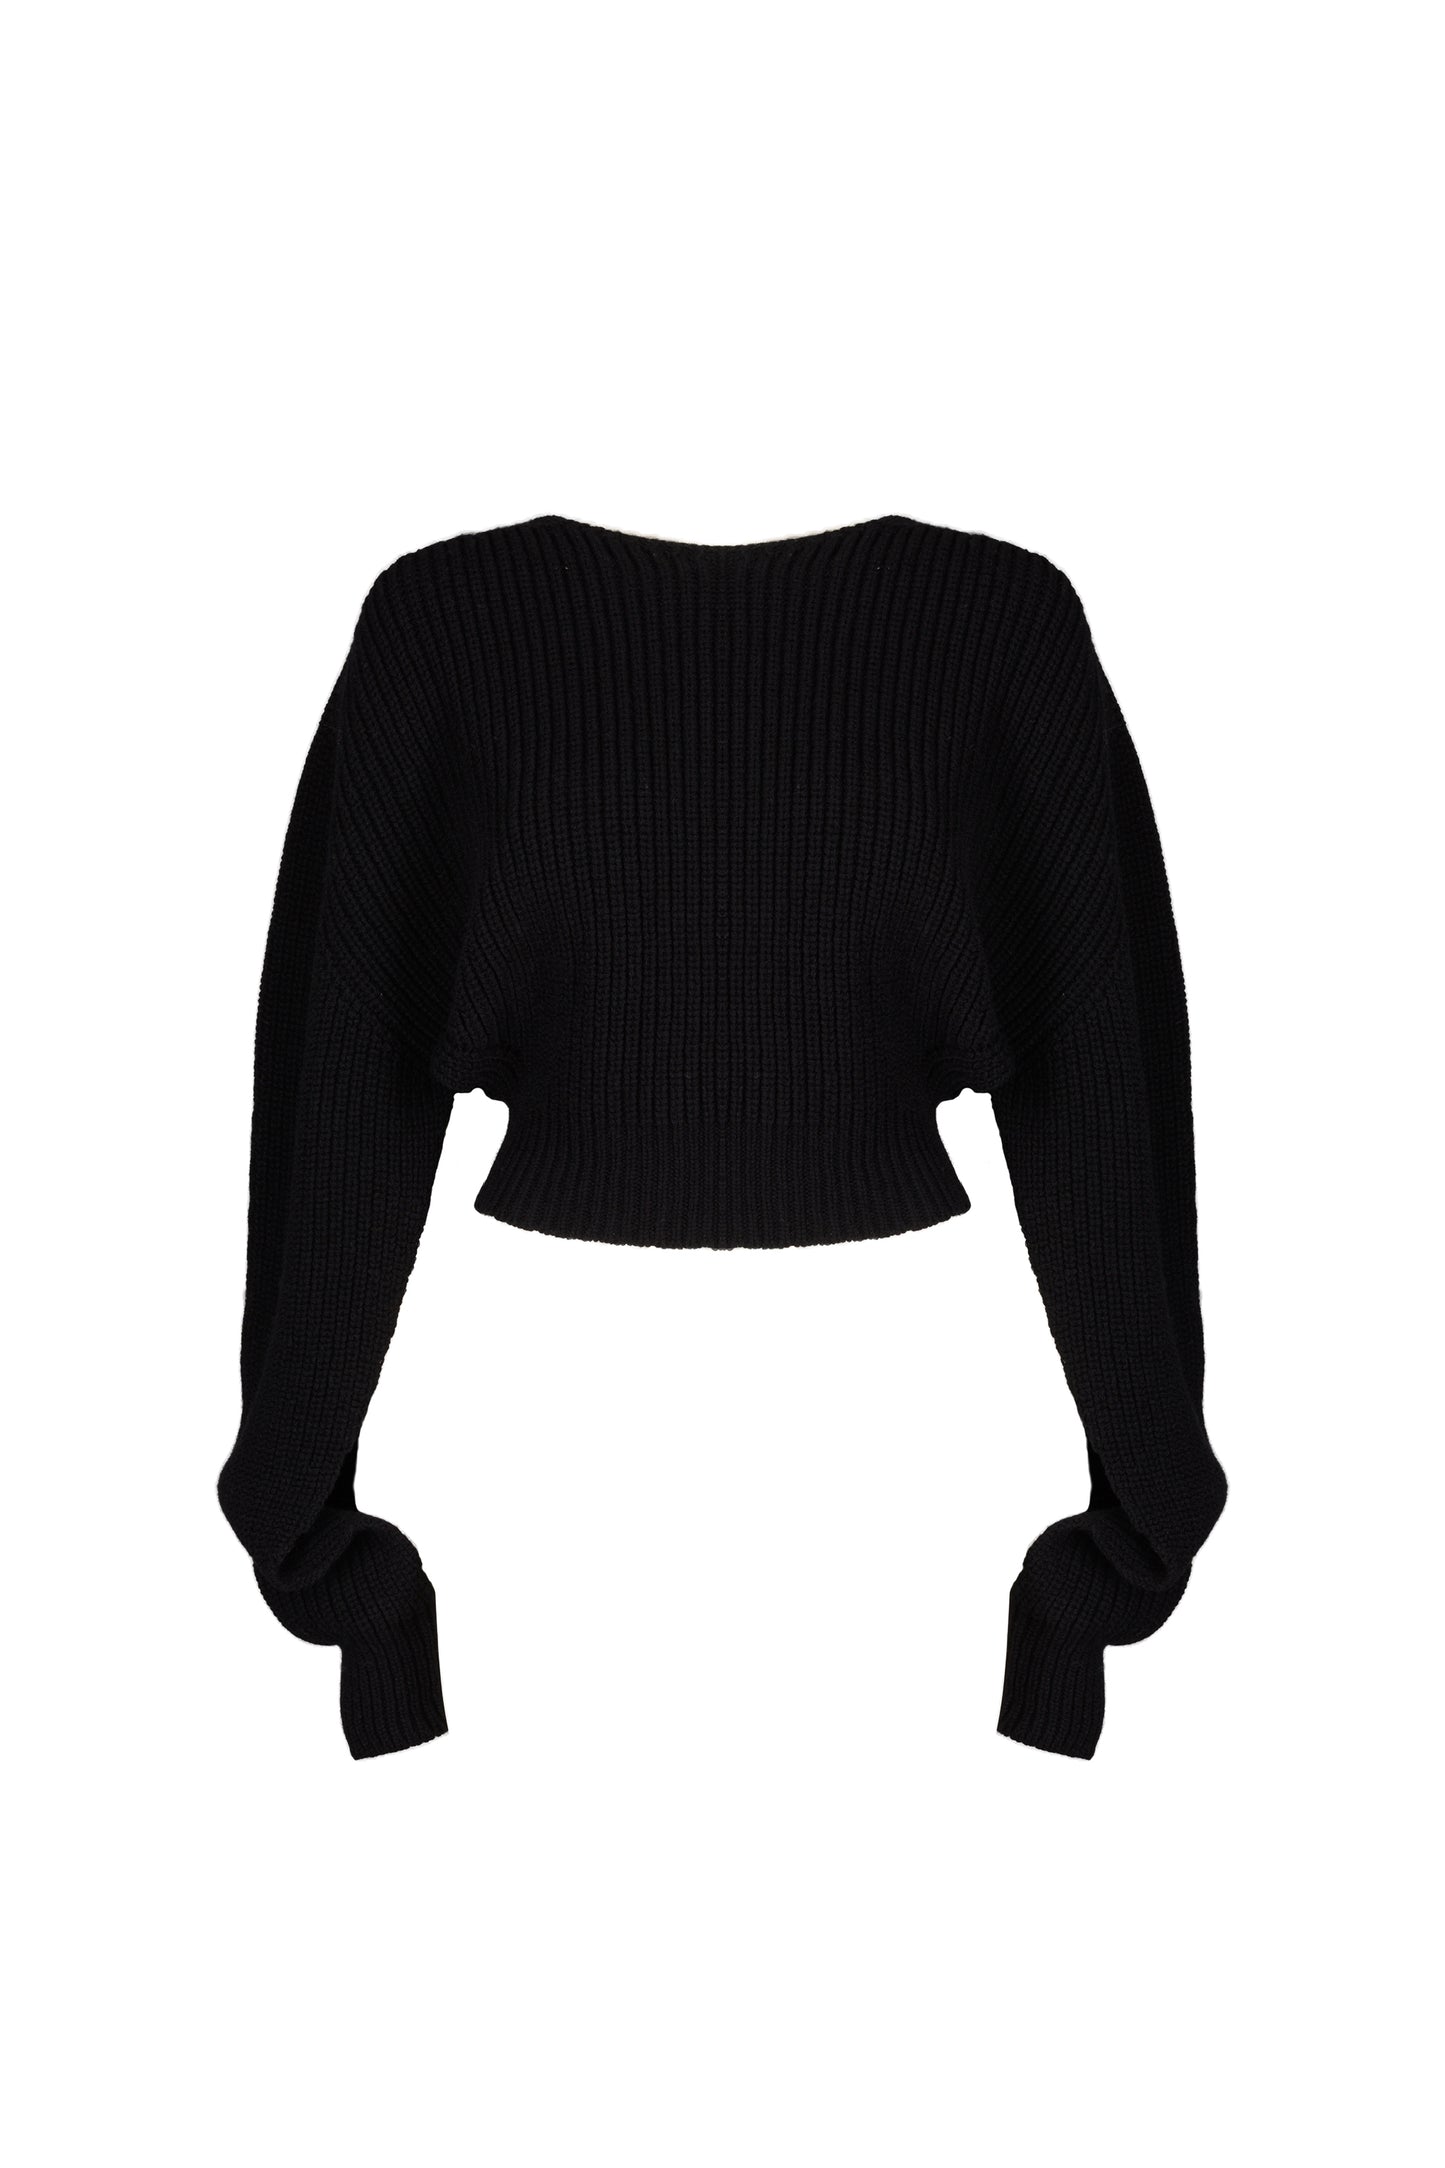 Black cropped chunky knit jumper with open sides and sleeves design, featuring a ribbed texture for a bold and edgy style